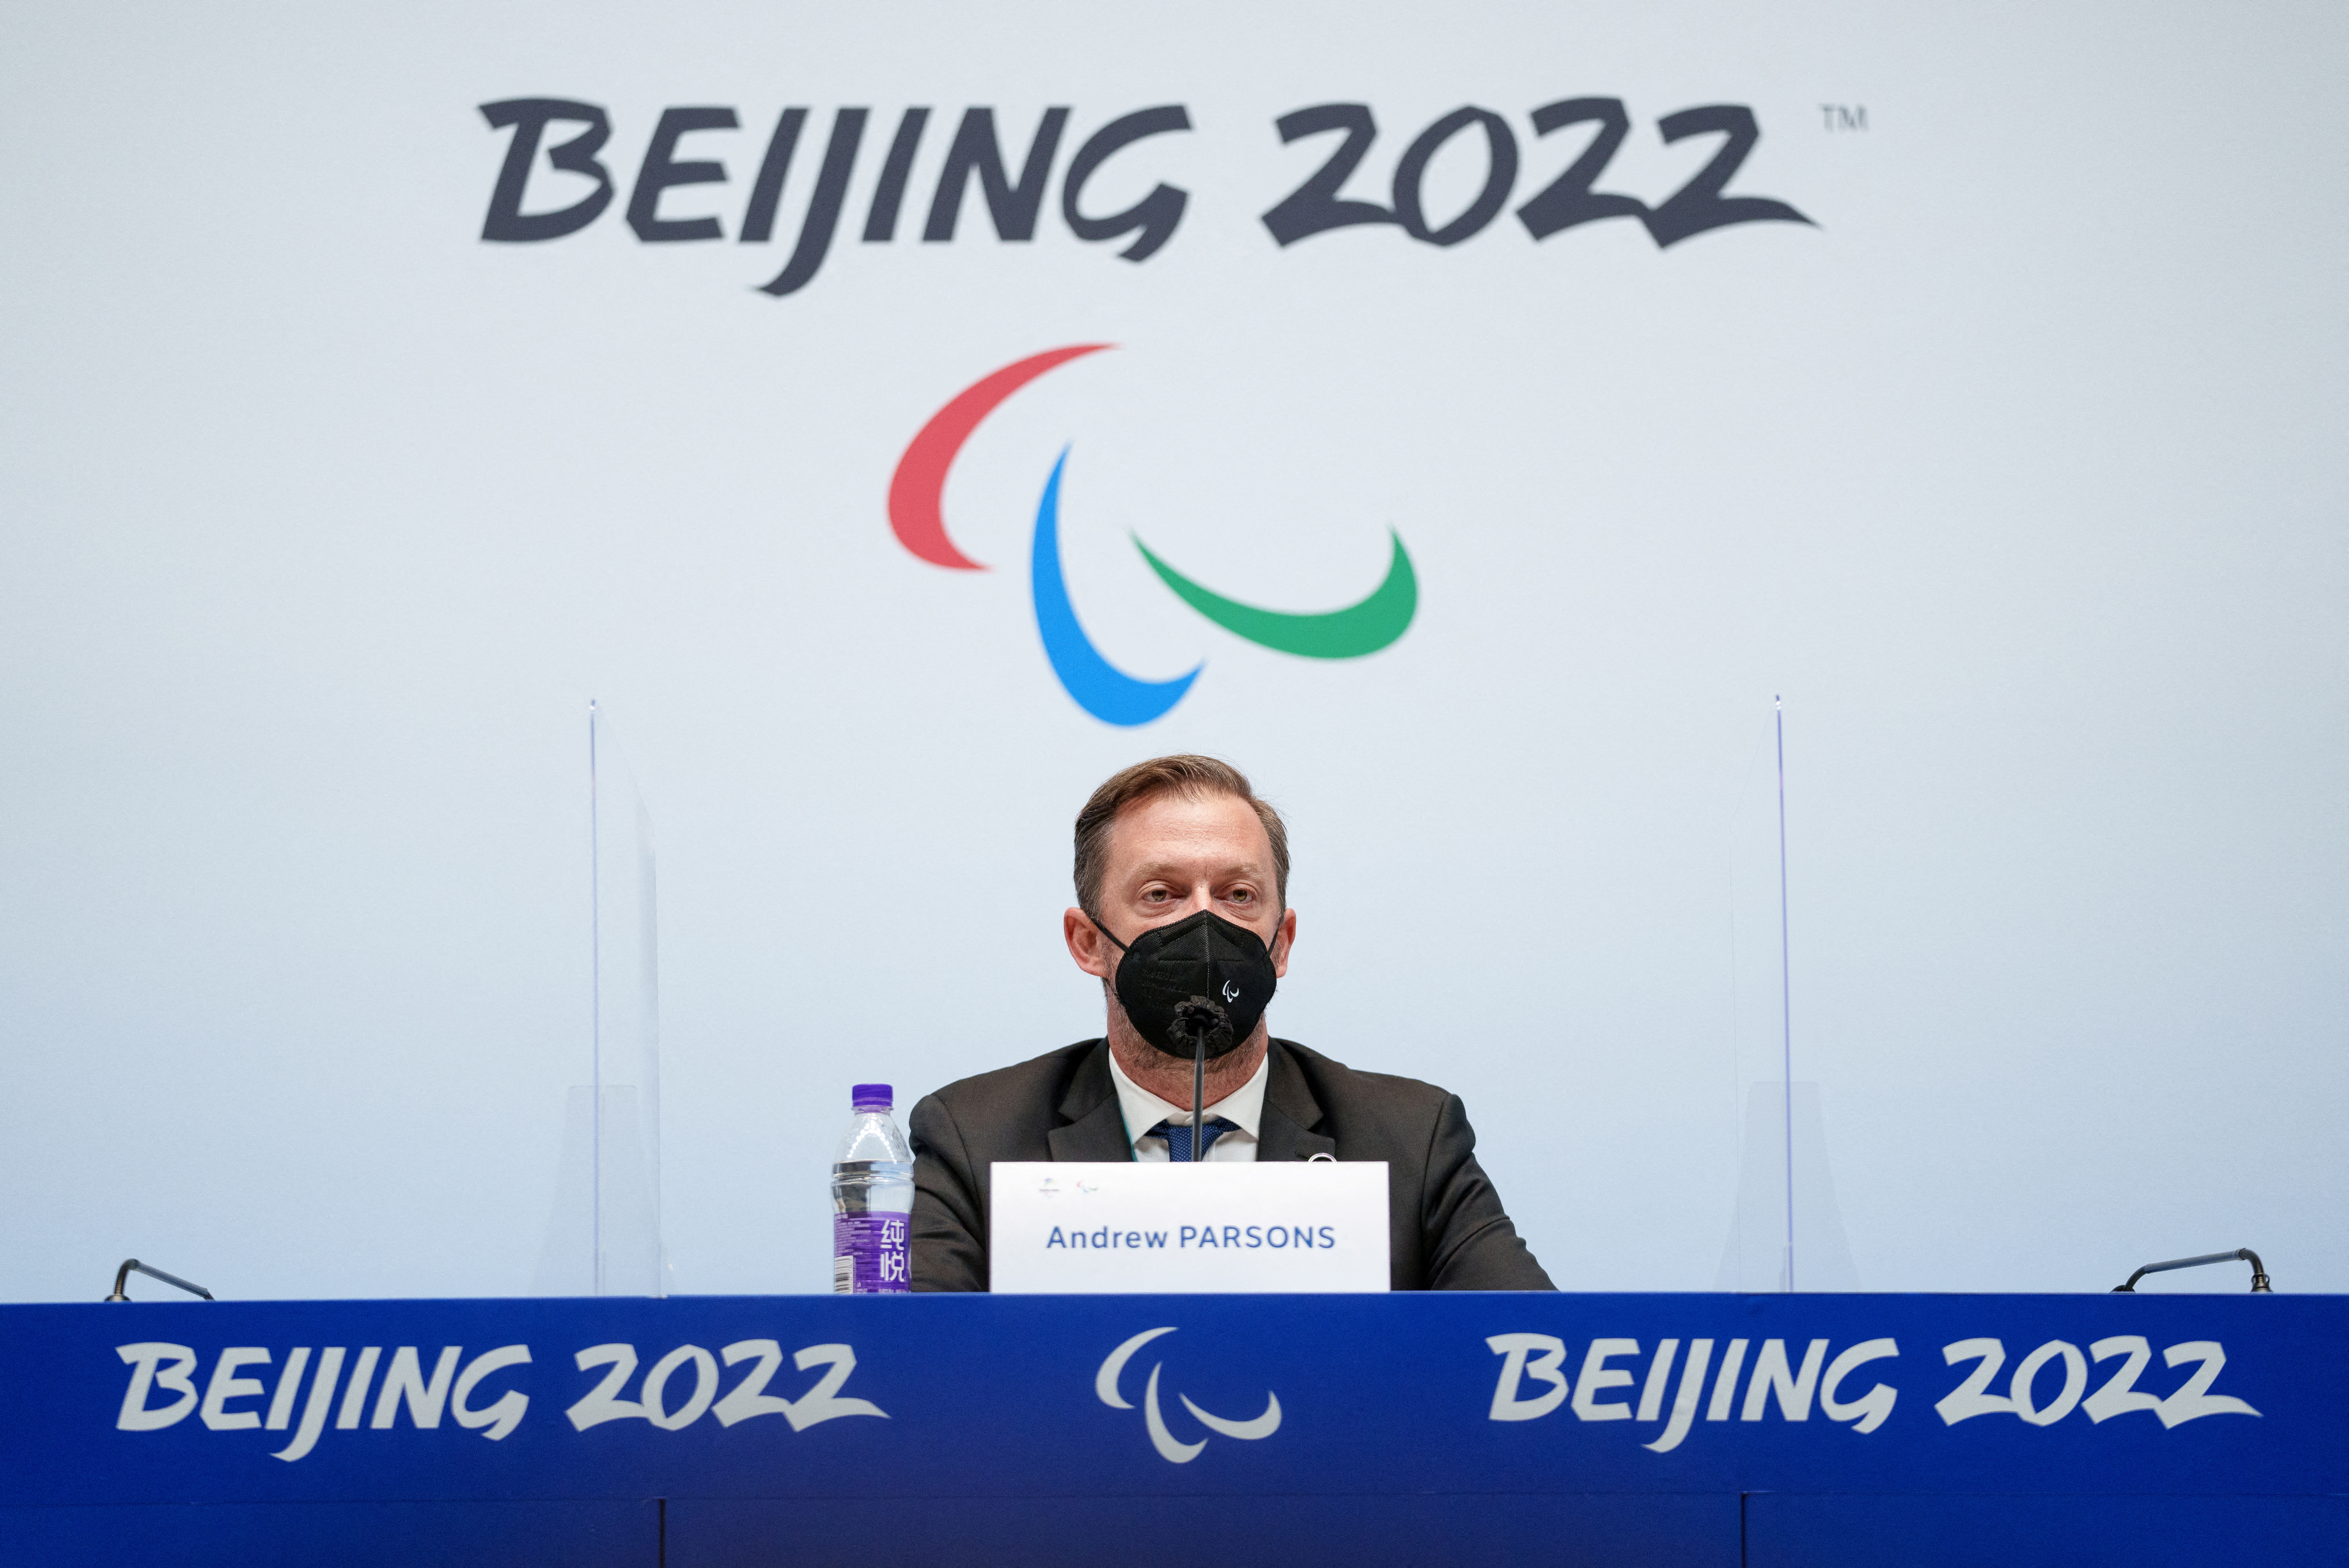  Winter Paralympic Games, following the IPC Governing Board decision in regards to Russian and Belarusian athletes competing during the Ukraine Crisis. 